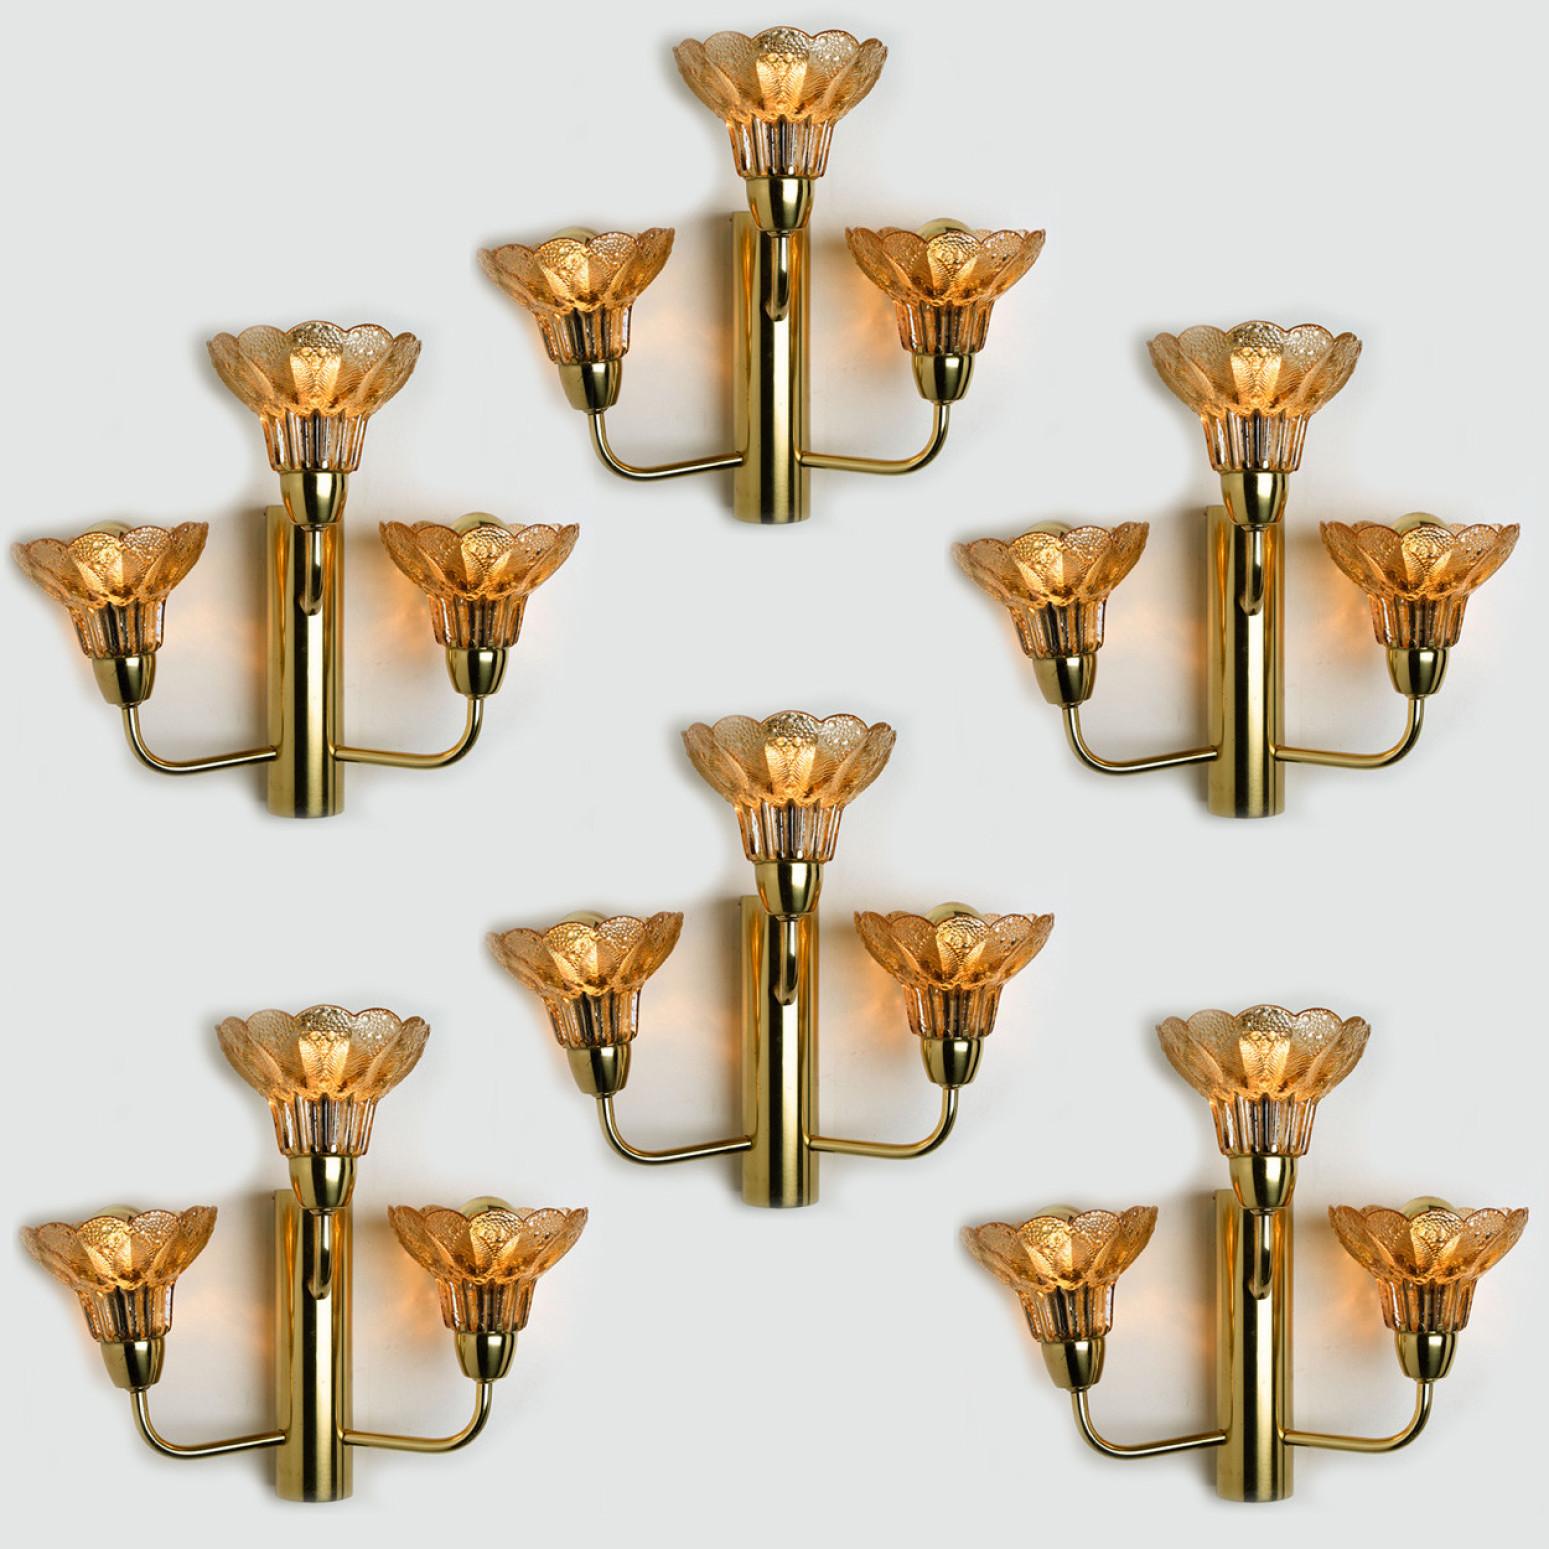 Several Flower Glass and Brass Wall Sconces, Germany, 1960s For Sale 9